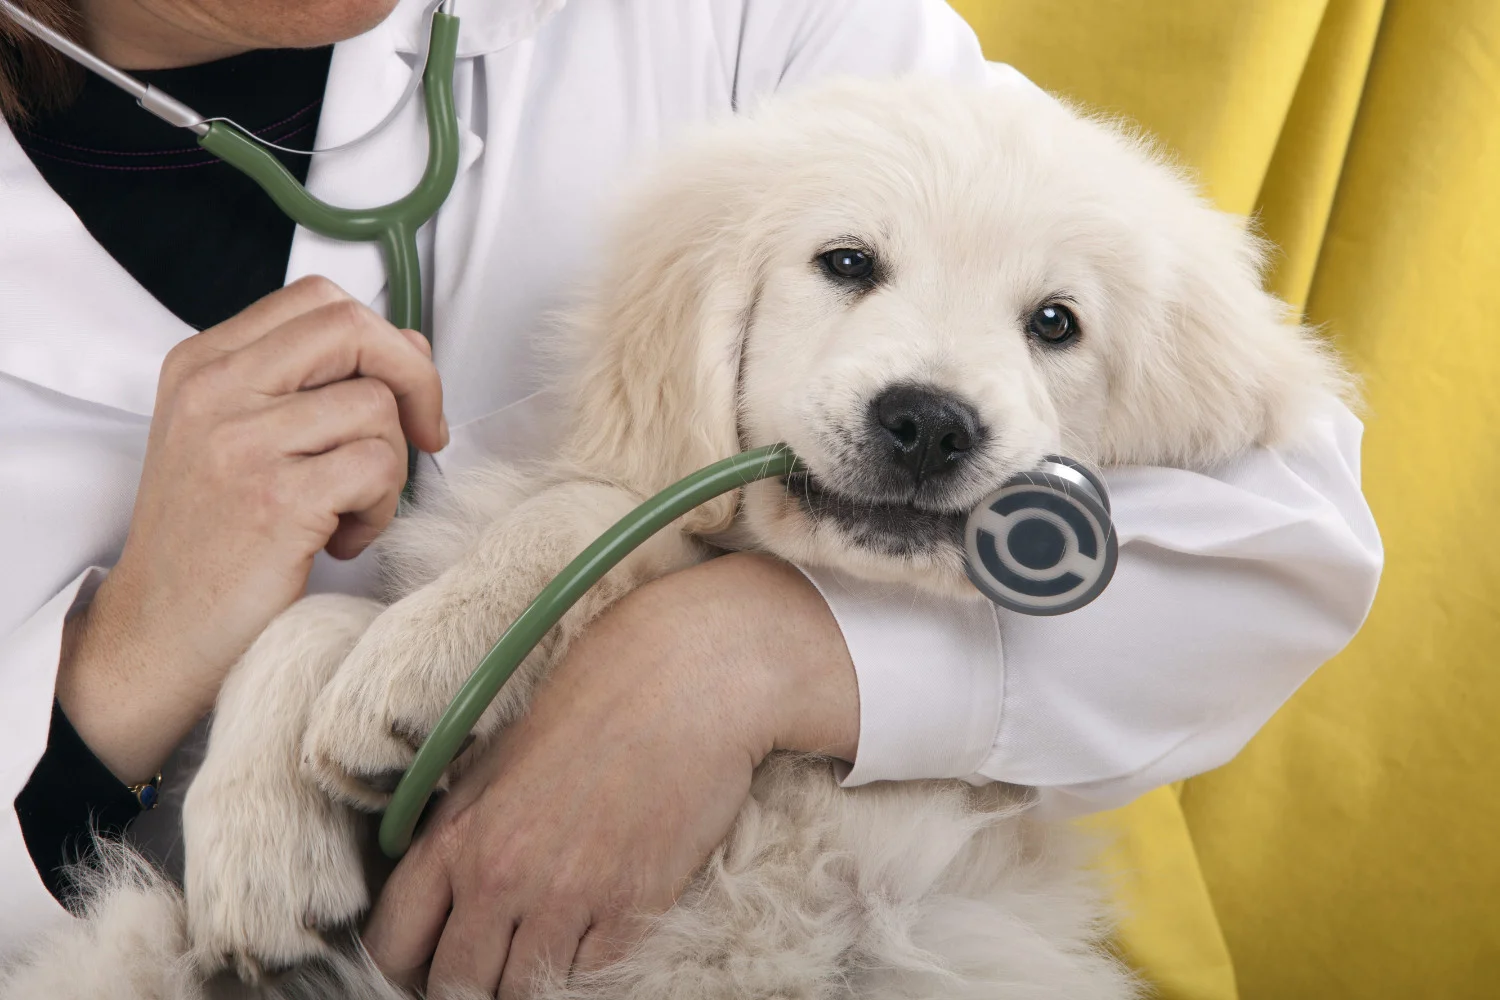 Bulgaria has specific entry requirements for pets, including dogs, to prevent the spread of diseases.